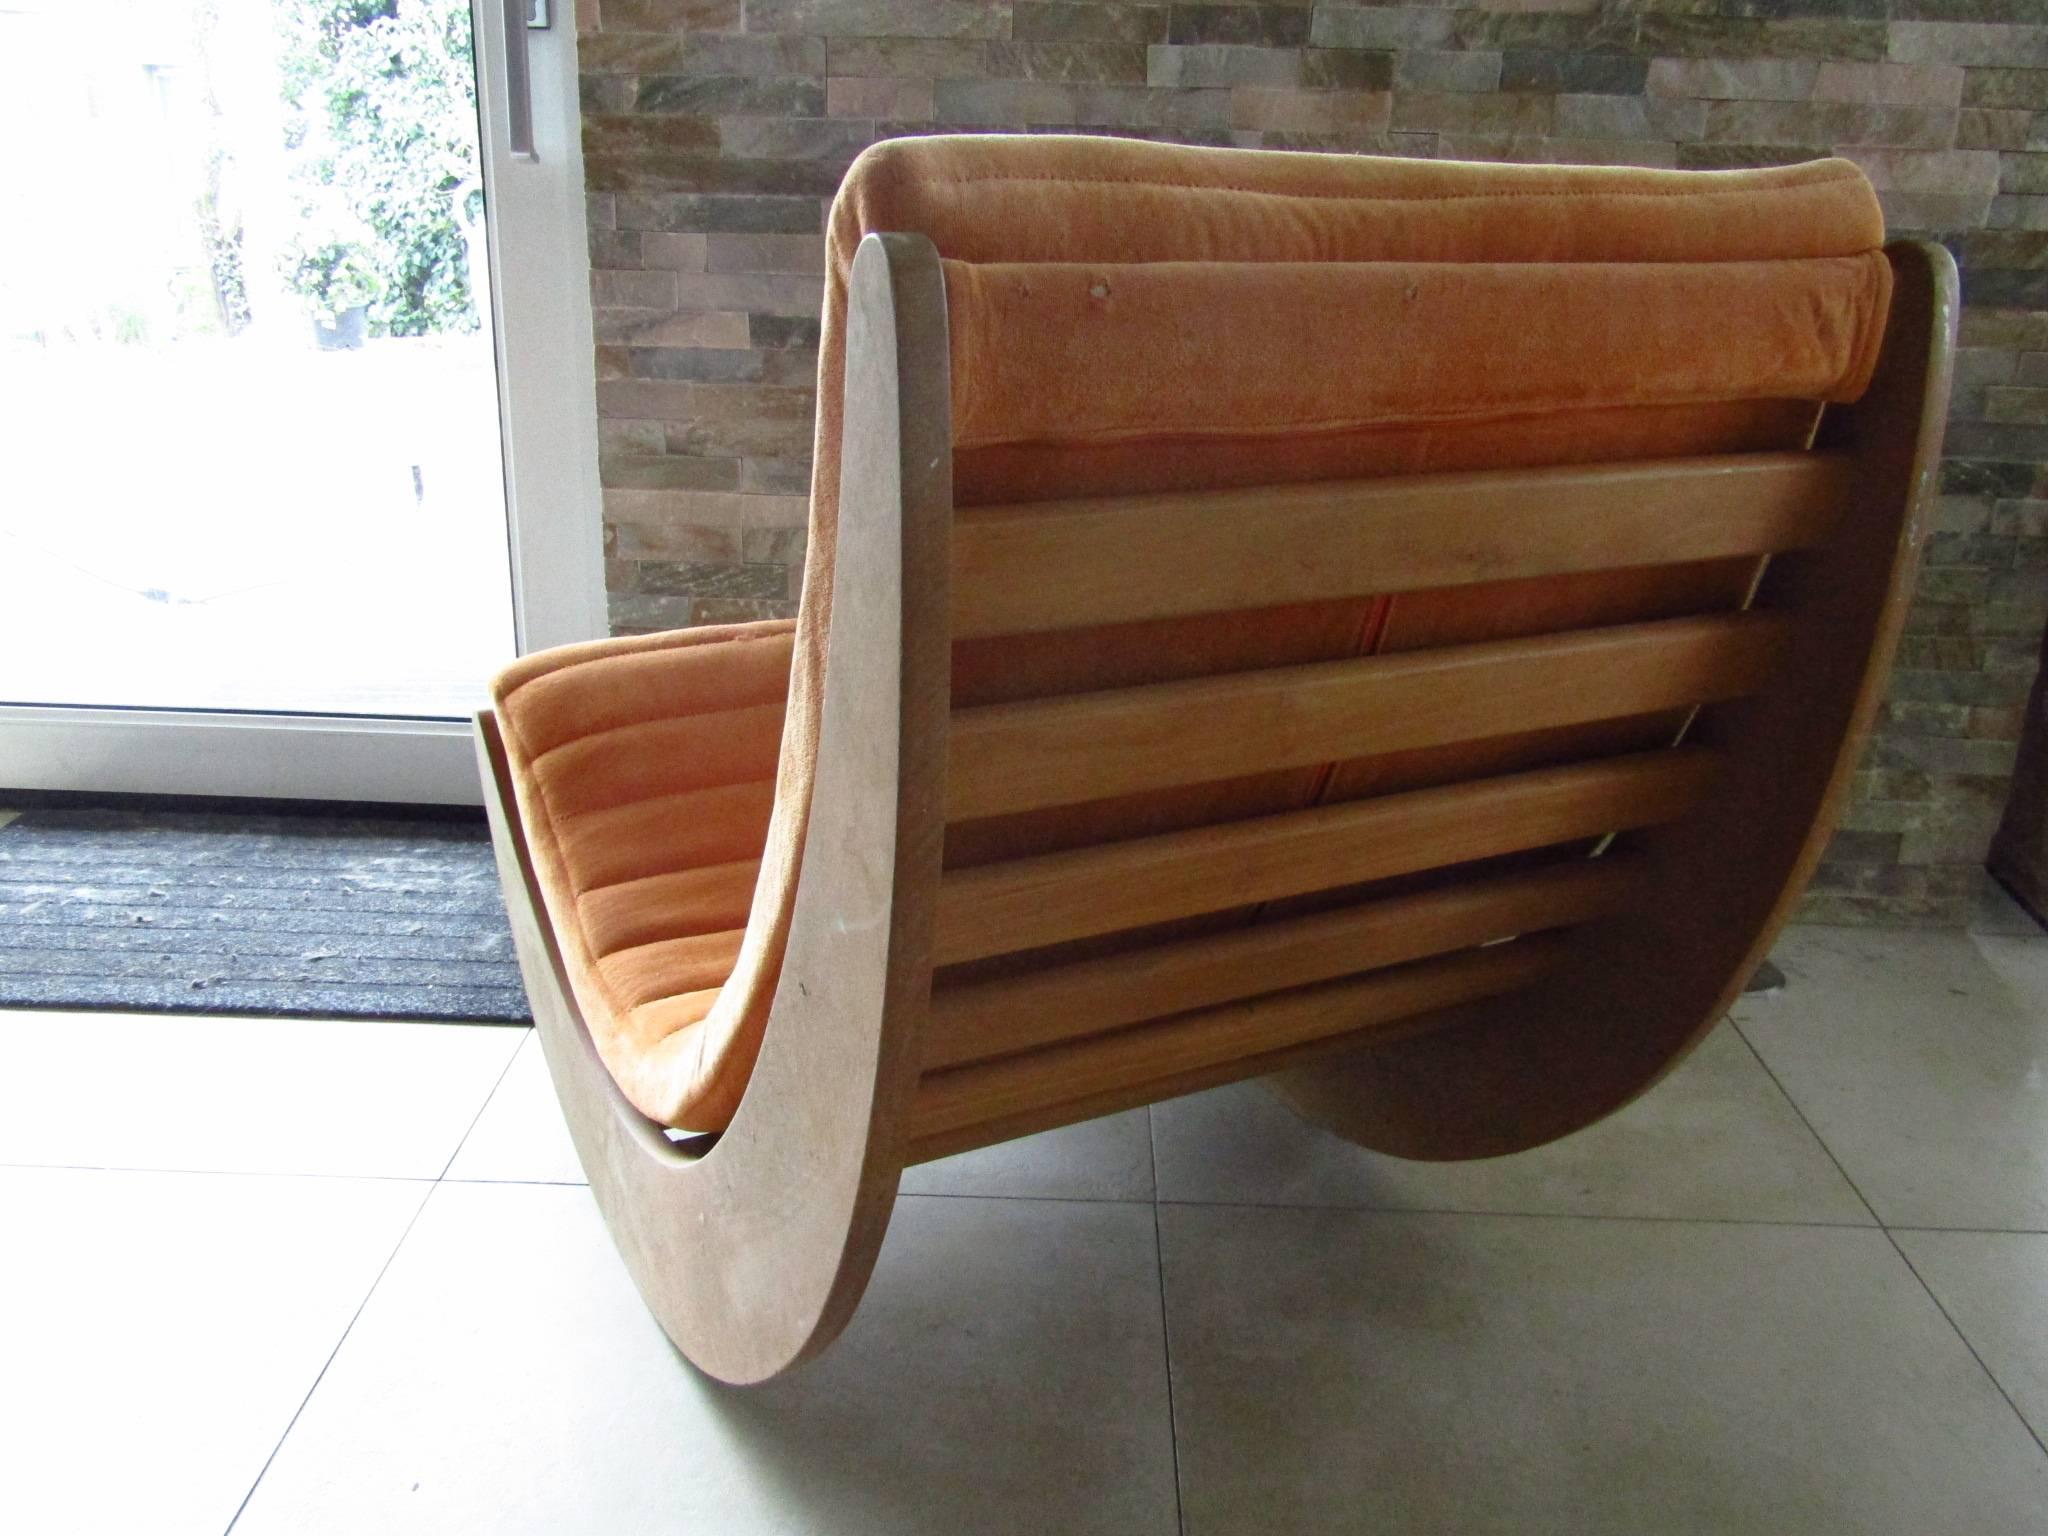 This unique floor rocker features the progressive Mid-Century style of Danish designer Verner Panton, originally released in 1974 for Rosenthal Studioline. Untouched, unrestored original condition, solid, no structural damages! 
We can offer full